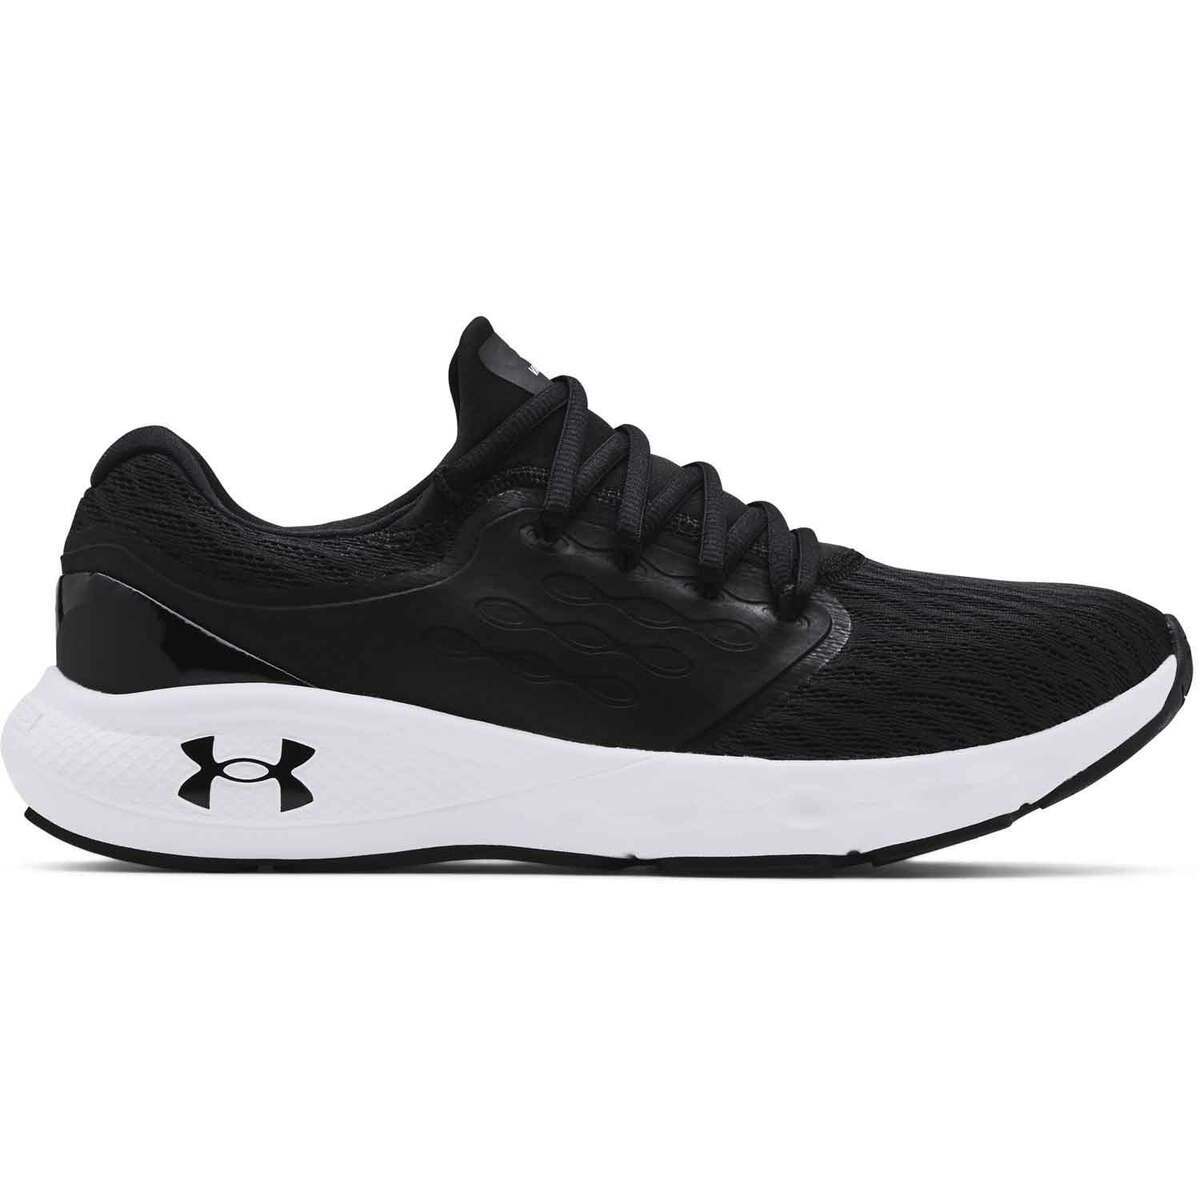 Under Amour Men's Charged Vantage Running Shoes | Sportsman's Warehouse